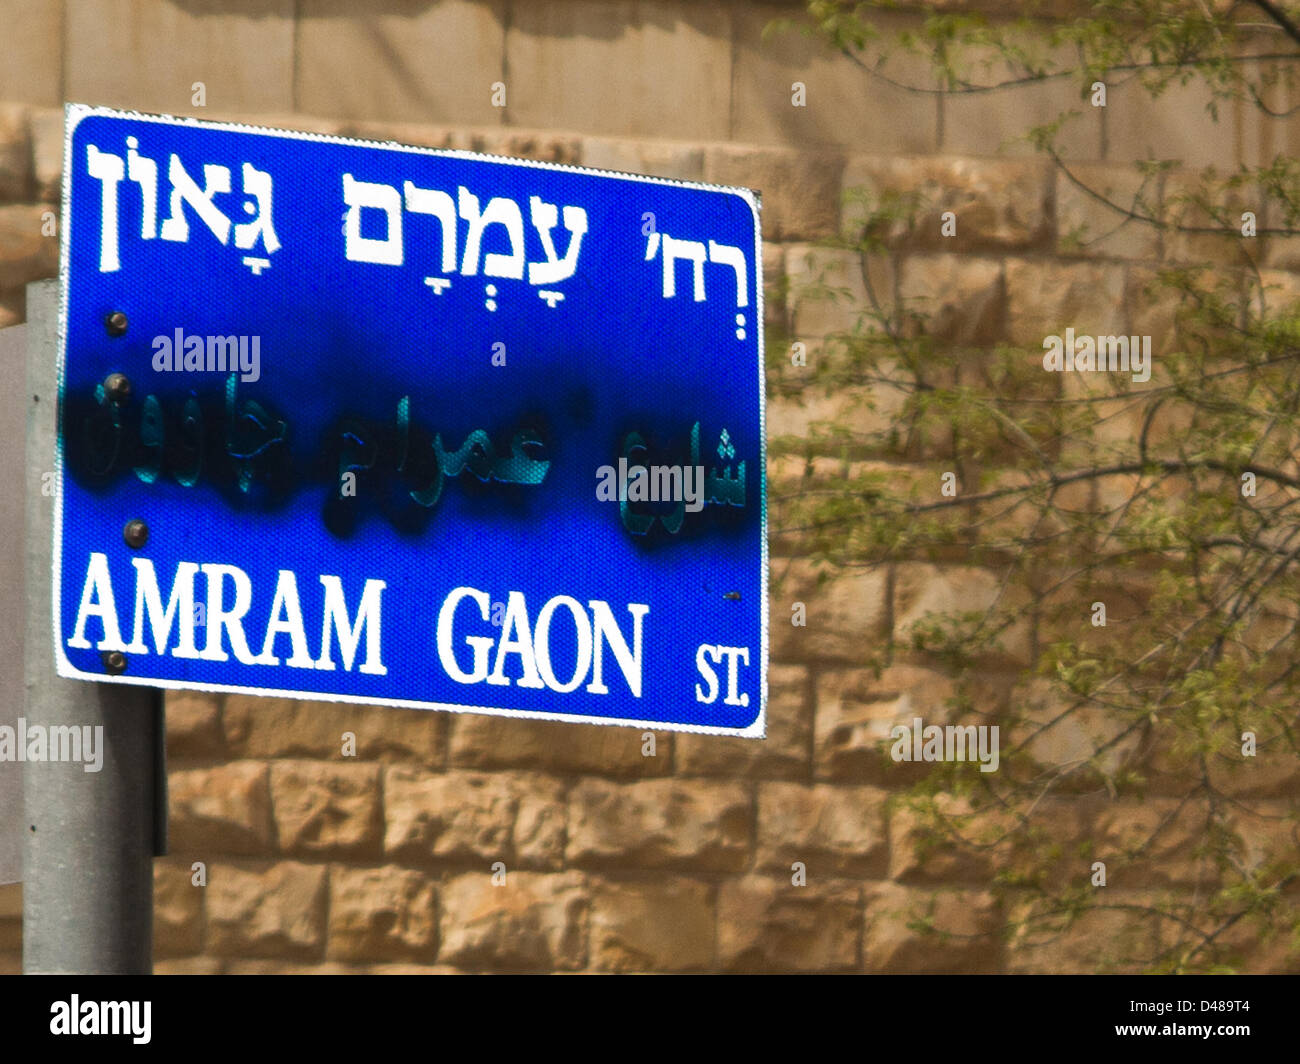 A trilingual sign bearing the name of Amram Gaon Street has been vandalized, marring the Arabic inscription, as part of an ongoing anti-Arab racist campaign, widespread across the Kirayt Moshe neighborhood. Jerusalem, Israel. 8-March-2013.  Signs of anti-Arab racism are evident as a vast number of street signs have been tendentiously vandalized in the modern Zionist-religious neighborhood of Kiryat Moshe, deliberately marring Arabic inscription on trilingual street signs. Stock Photo